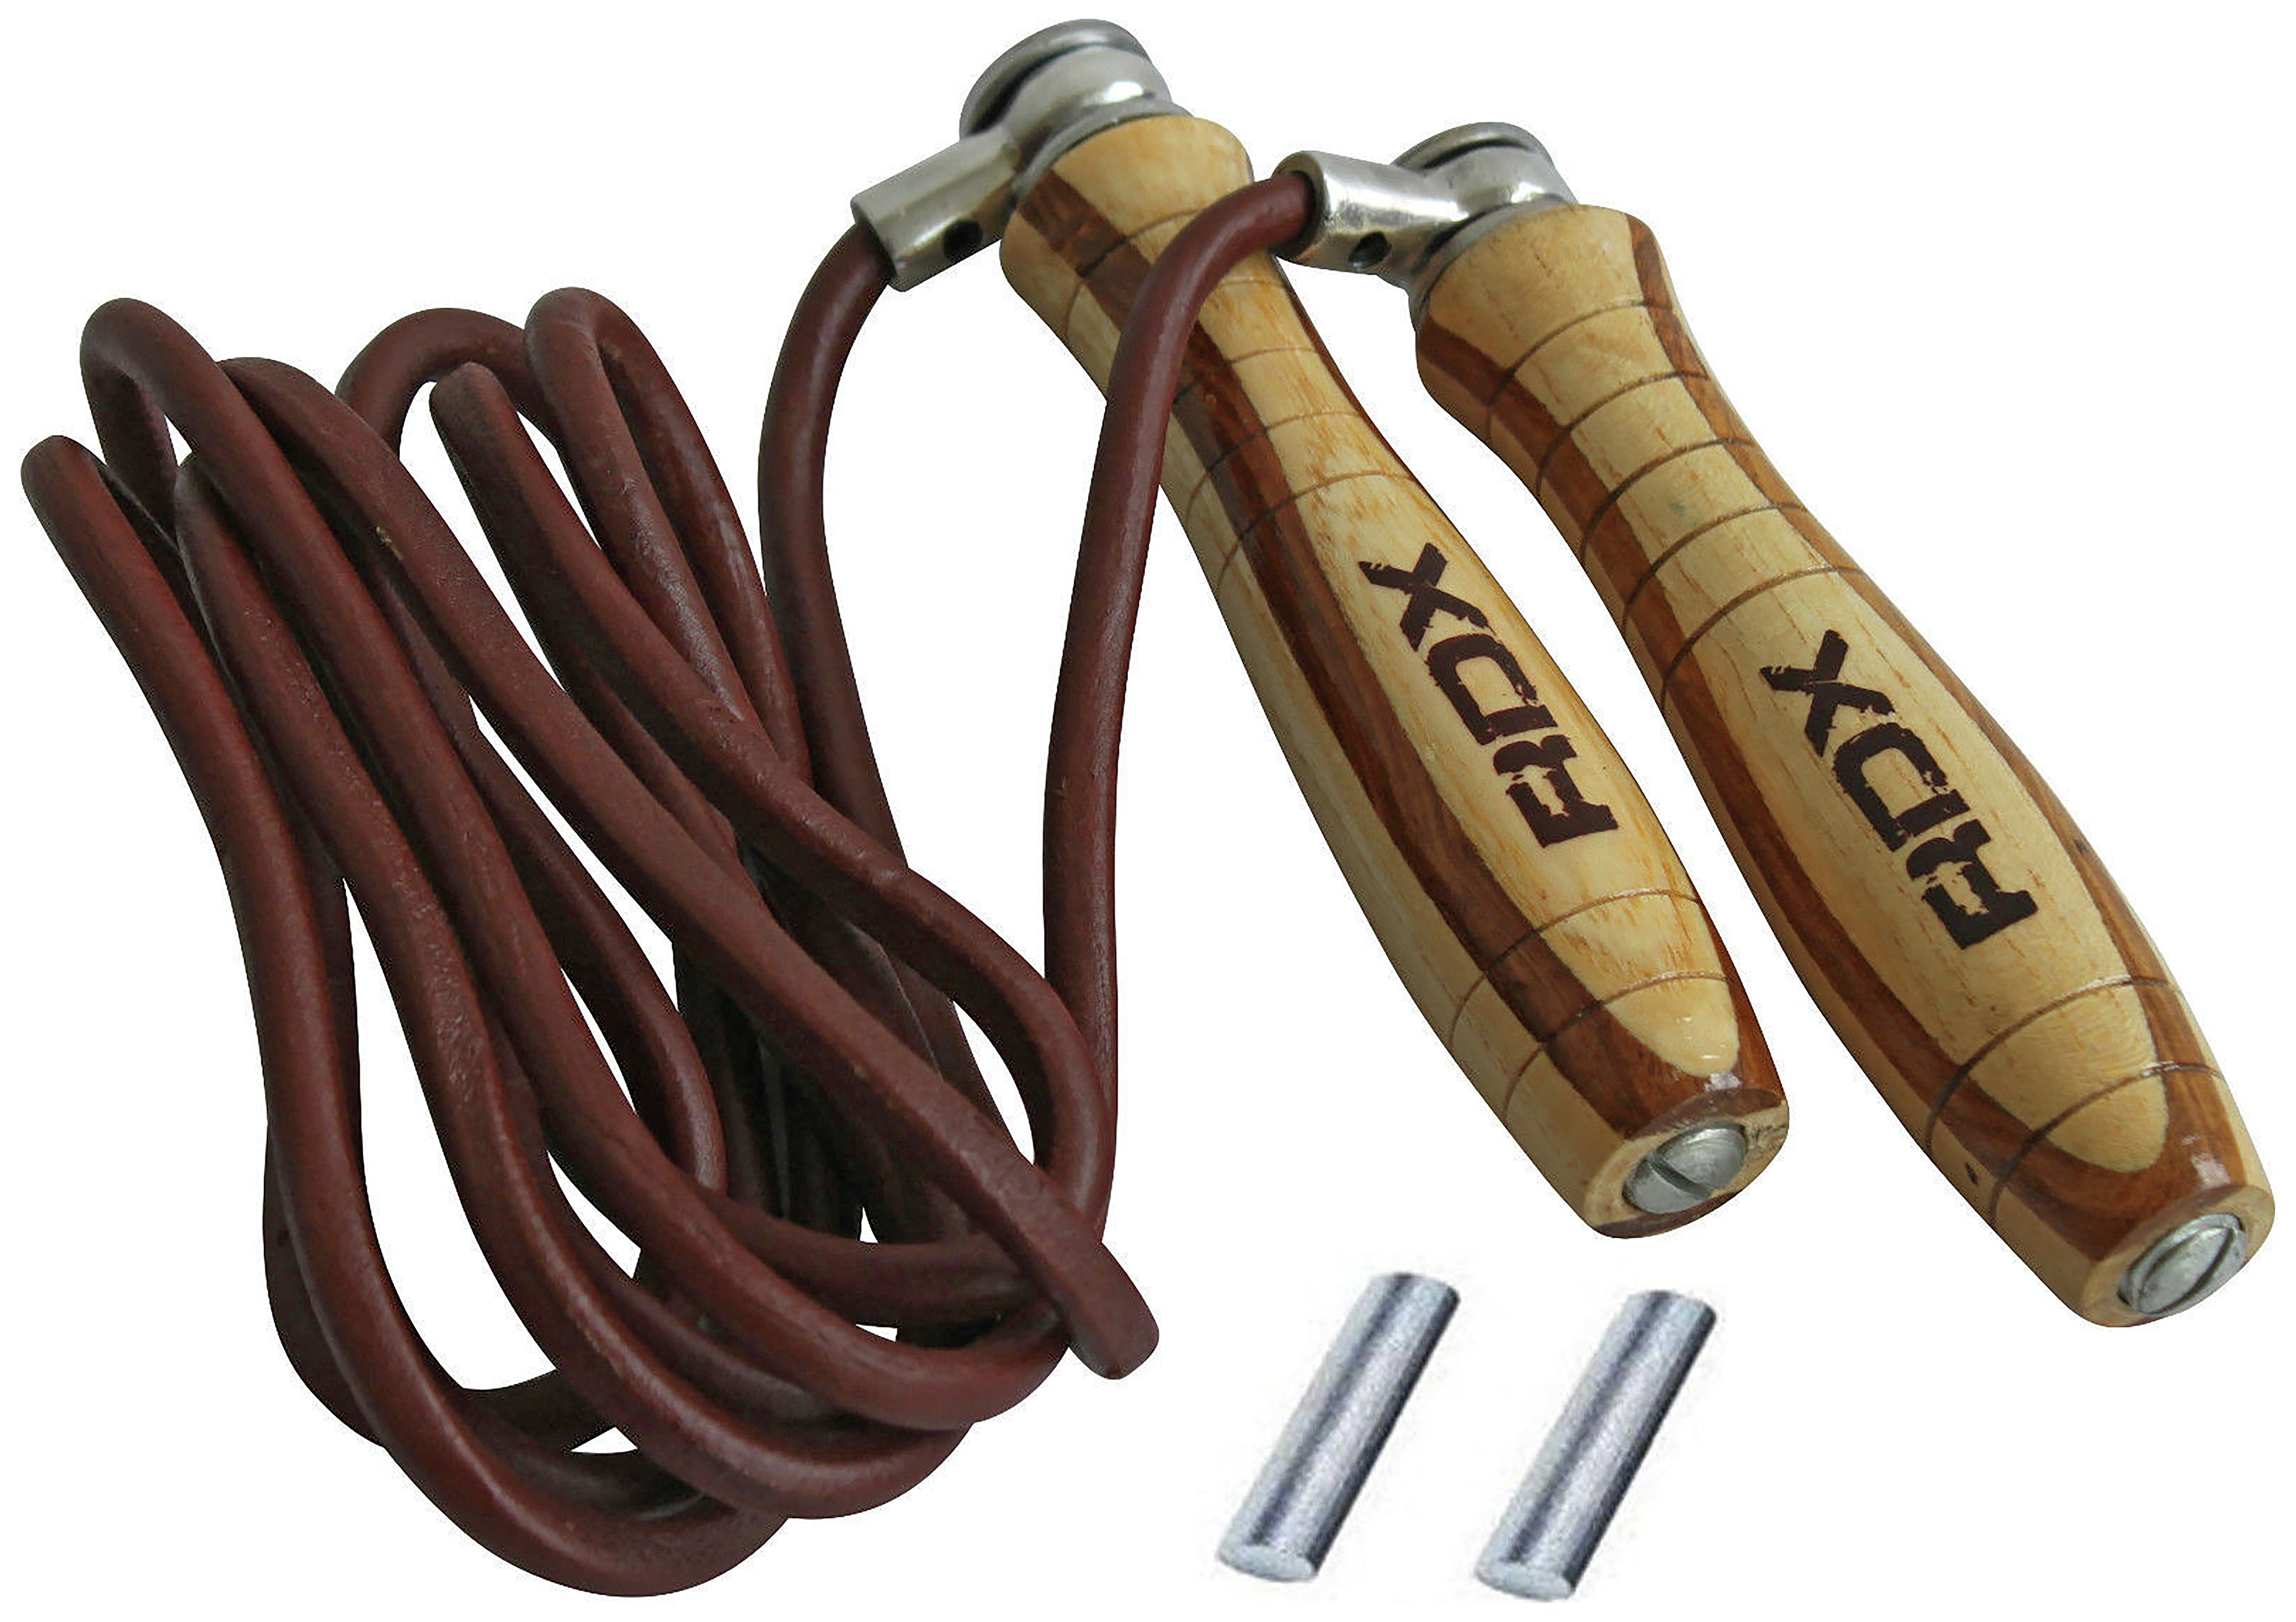 RDX Weighted Leather Skipping Rope